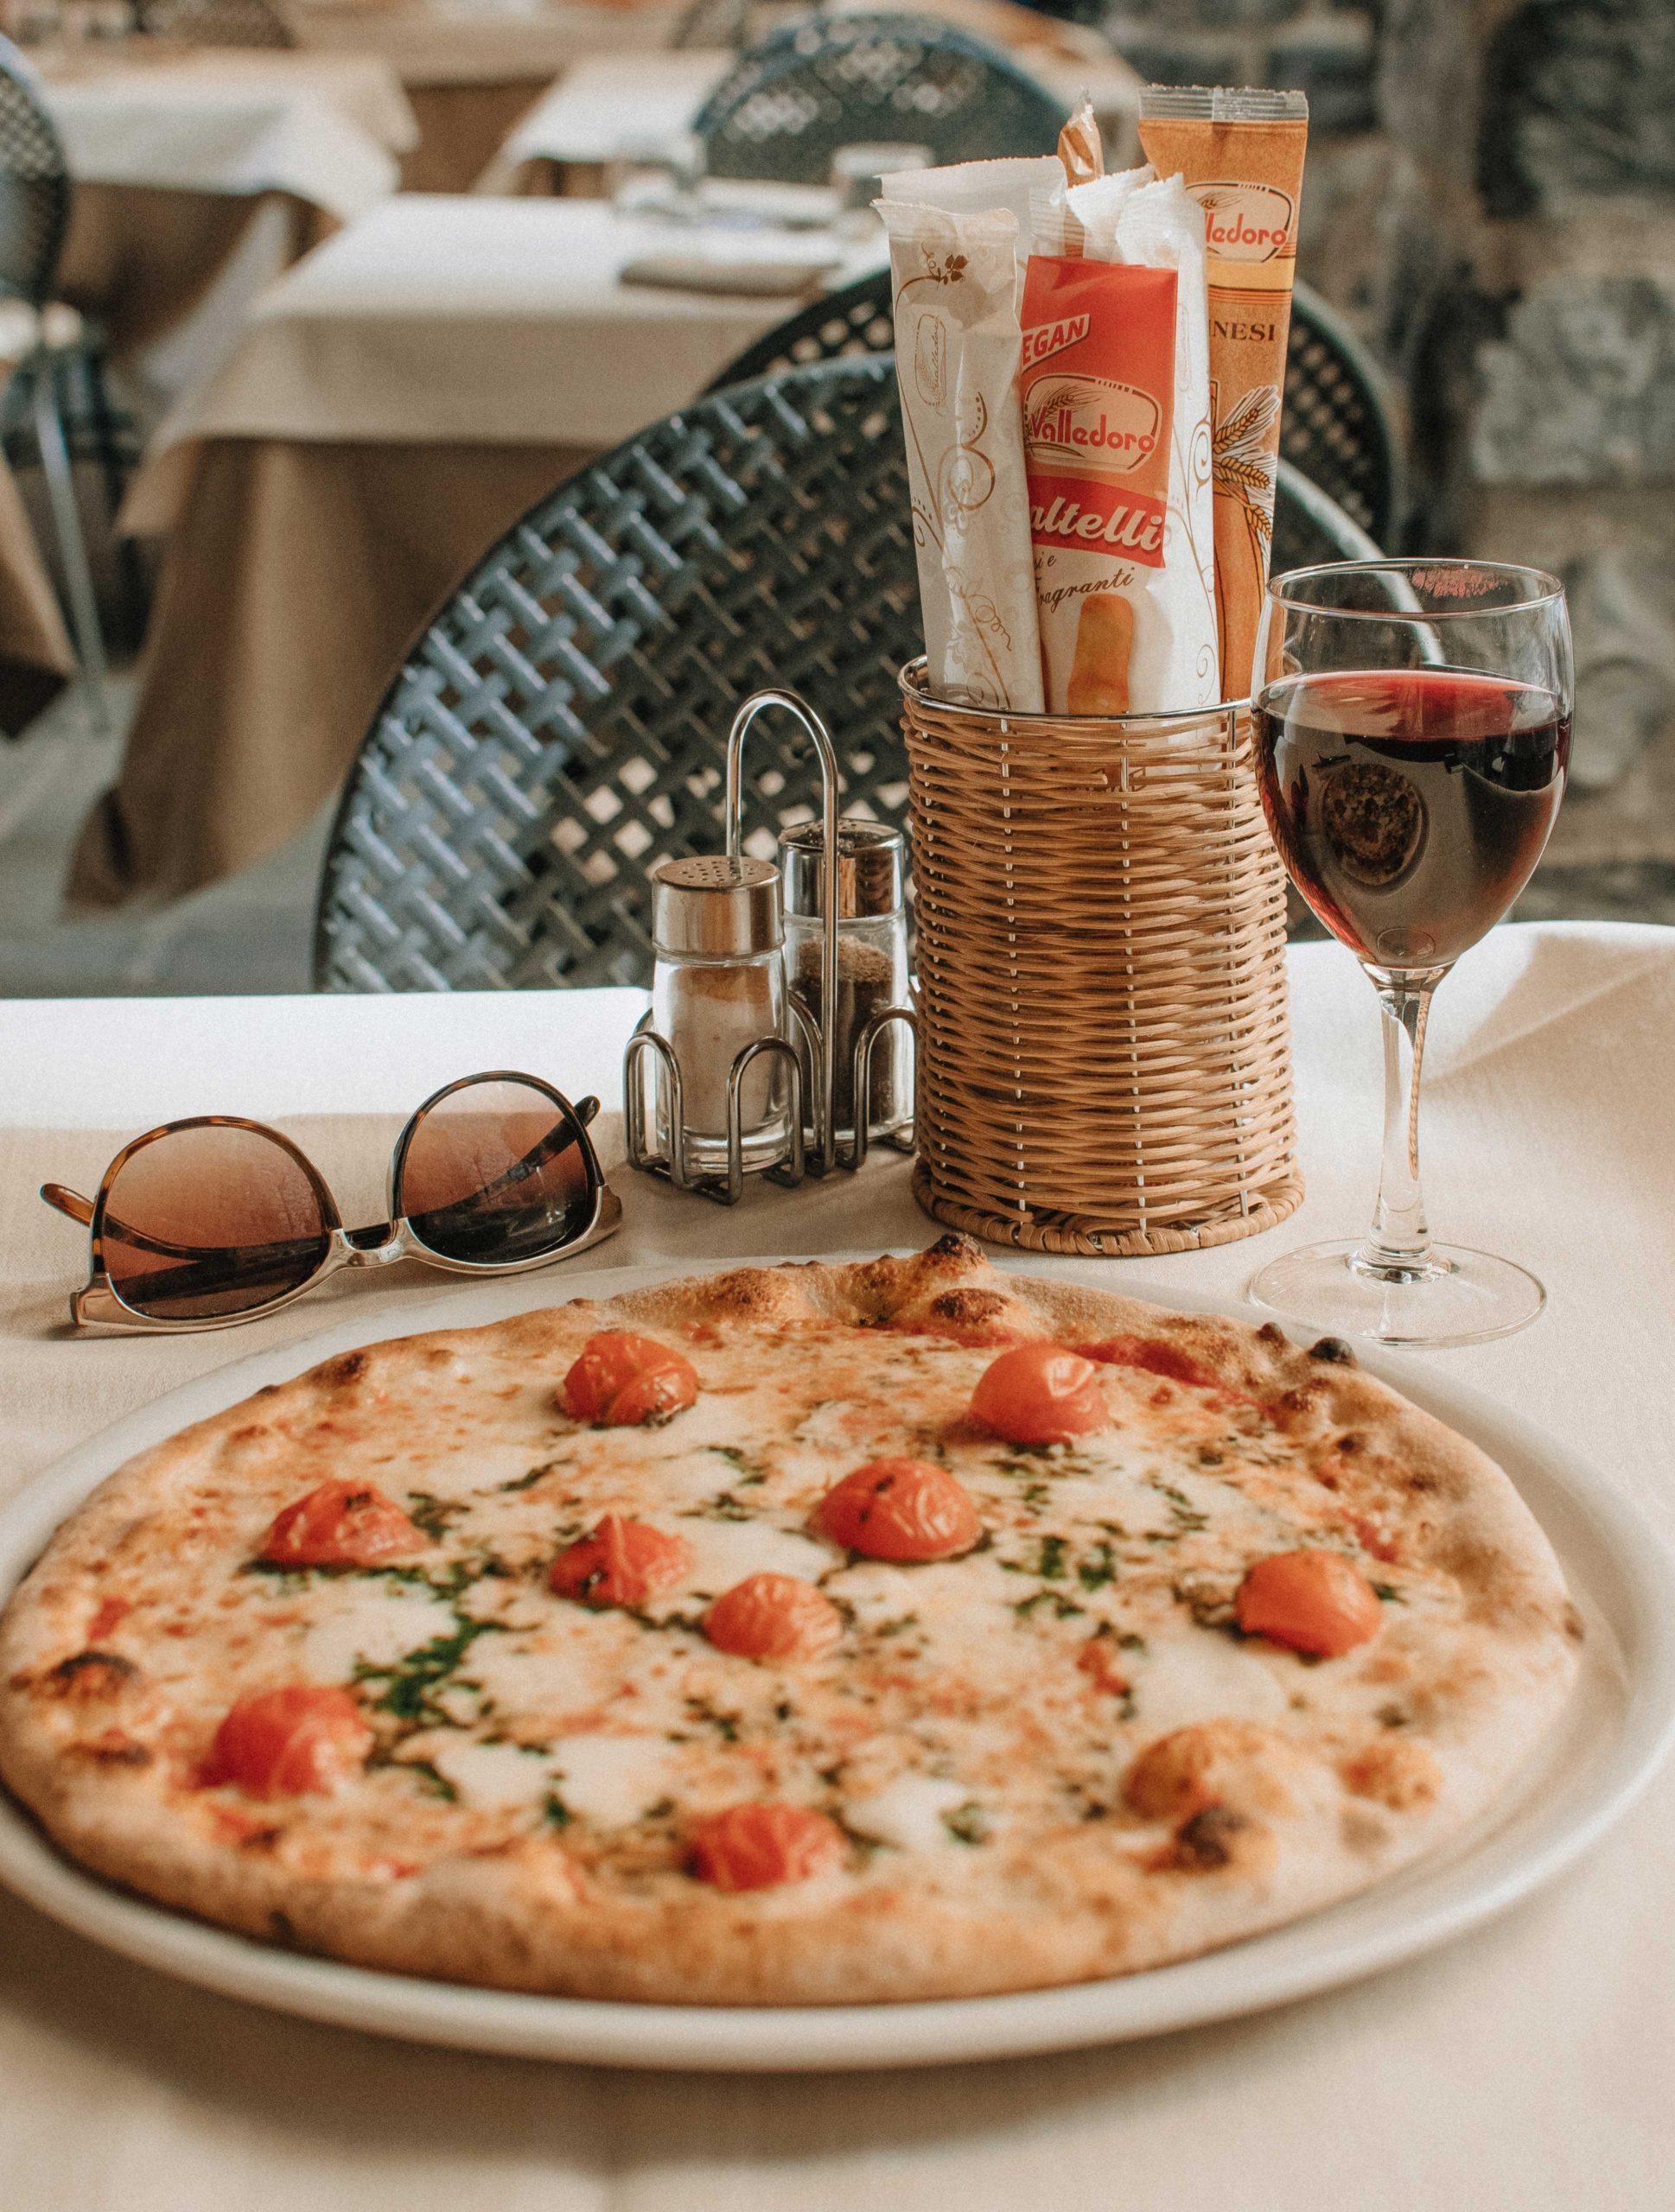 Local glass of red wine with a delicious pizza, Bellagio Italy